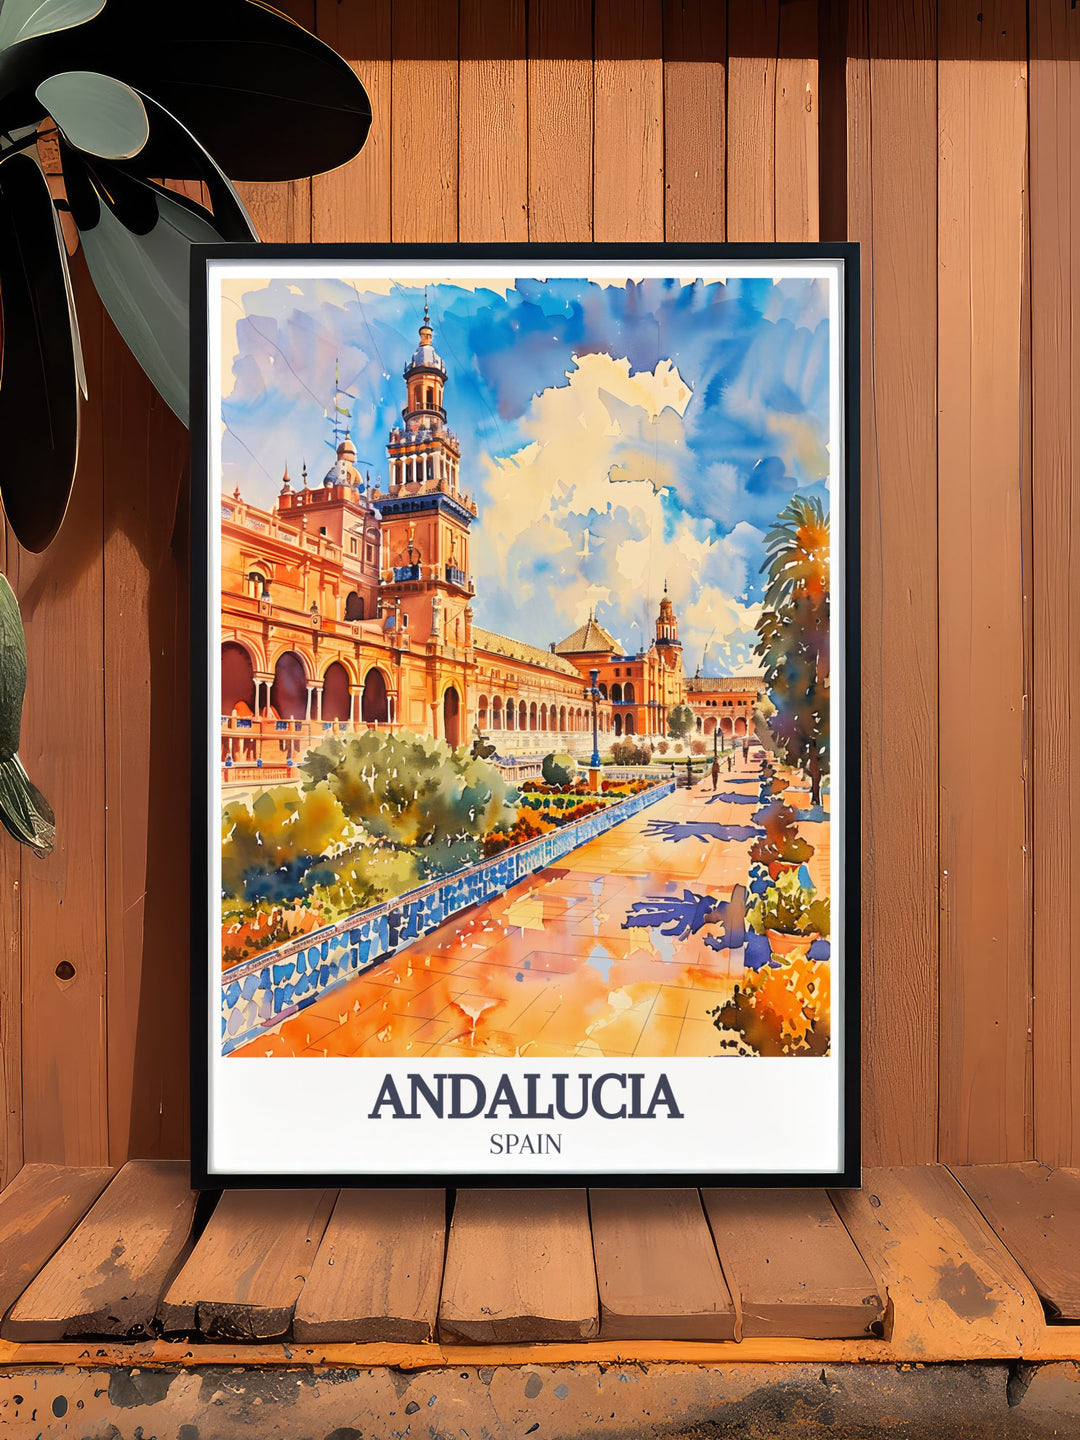 The architectural splendor of the Ambassadors Hall in the Alcazar of Seville is depicted in this travel poster, showcasing its intricate geometric patterns and gold leaf decorations, perfect for enhancing your home with a piece of Spanish heritage.